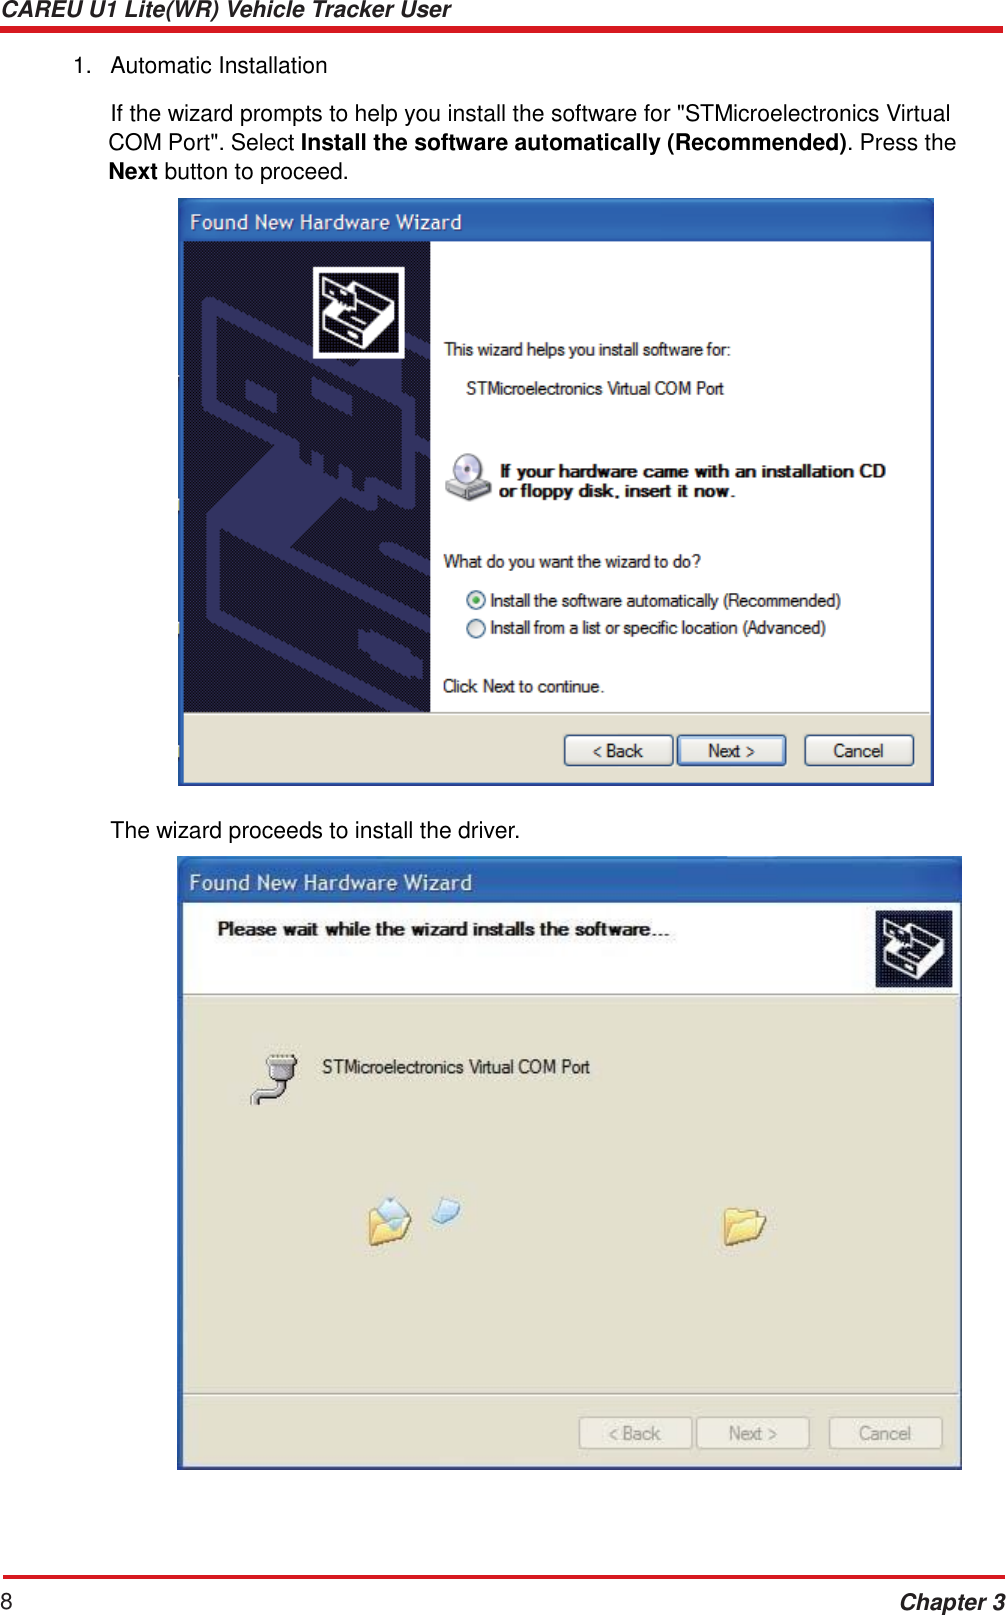 CAREU U1 Lite(WR) Vehicle Tracker User Guide 8 Chapter 3    1.   Automatic Installation  If the wizard prompts to help you install the software for &quot;STMicroelectronics Virtual COM Port&quot;. Select Install the software automatically (Recommended). Press the Next button to proceed.     The wizard proceeds to install the driver.   